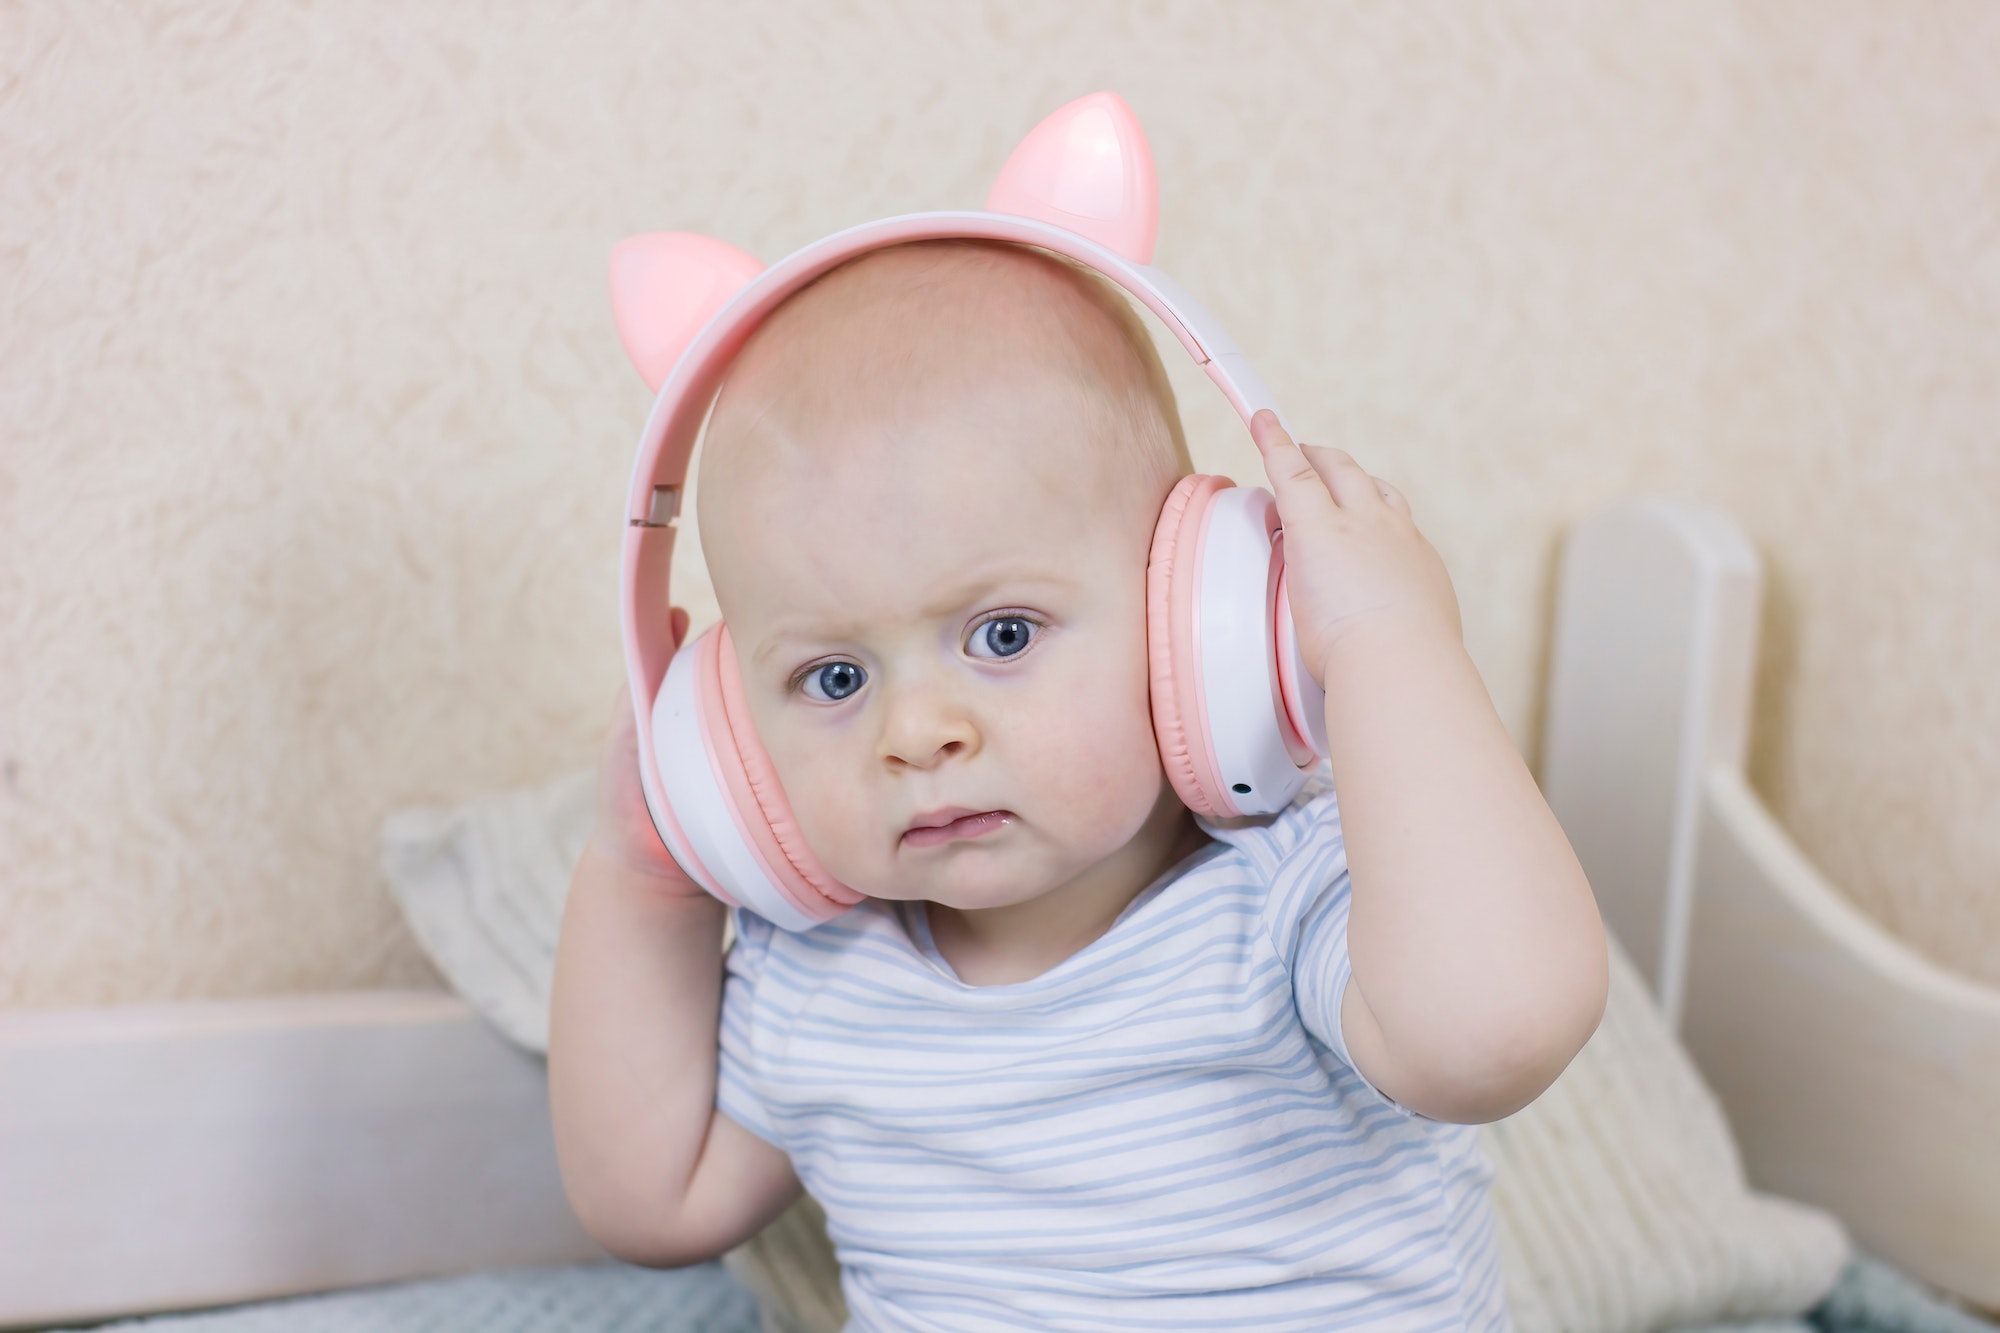 Cute Baby boy with headphones listening to music.